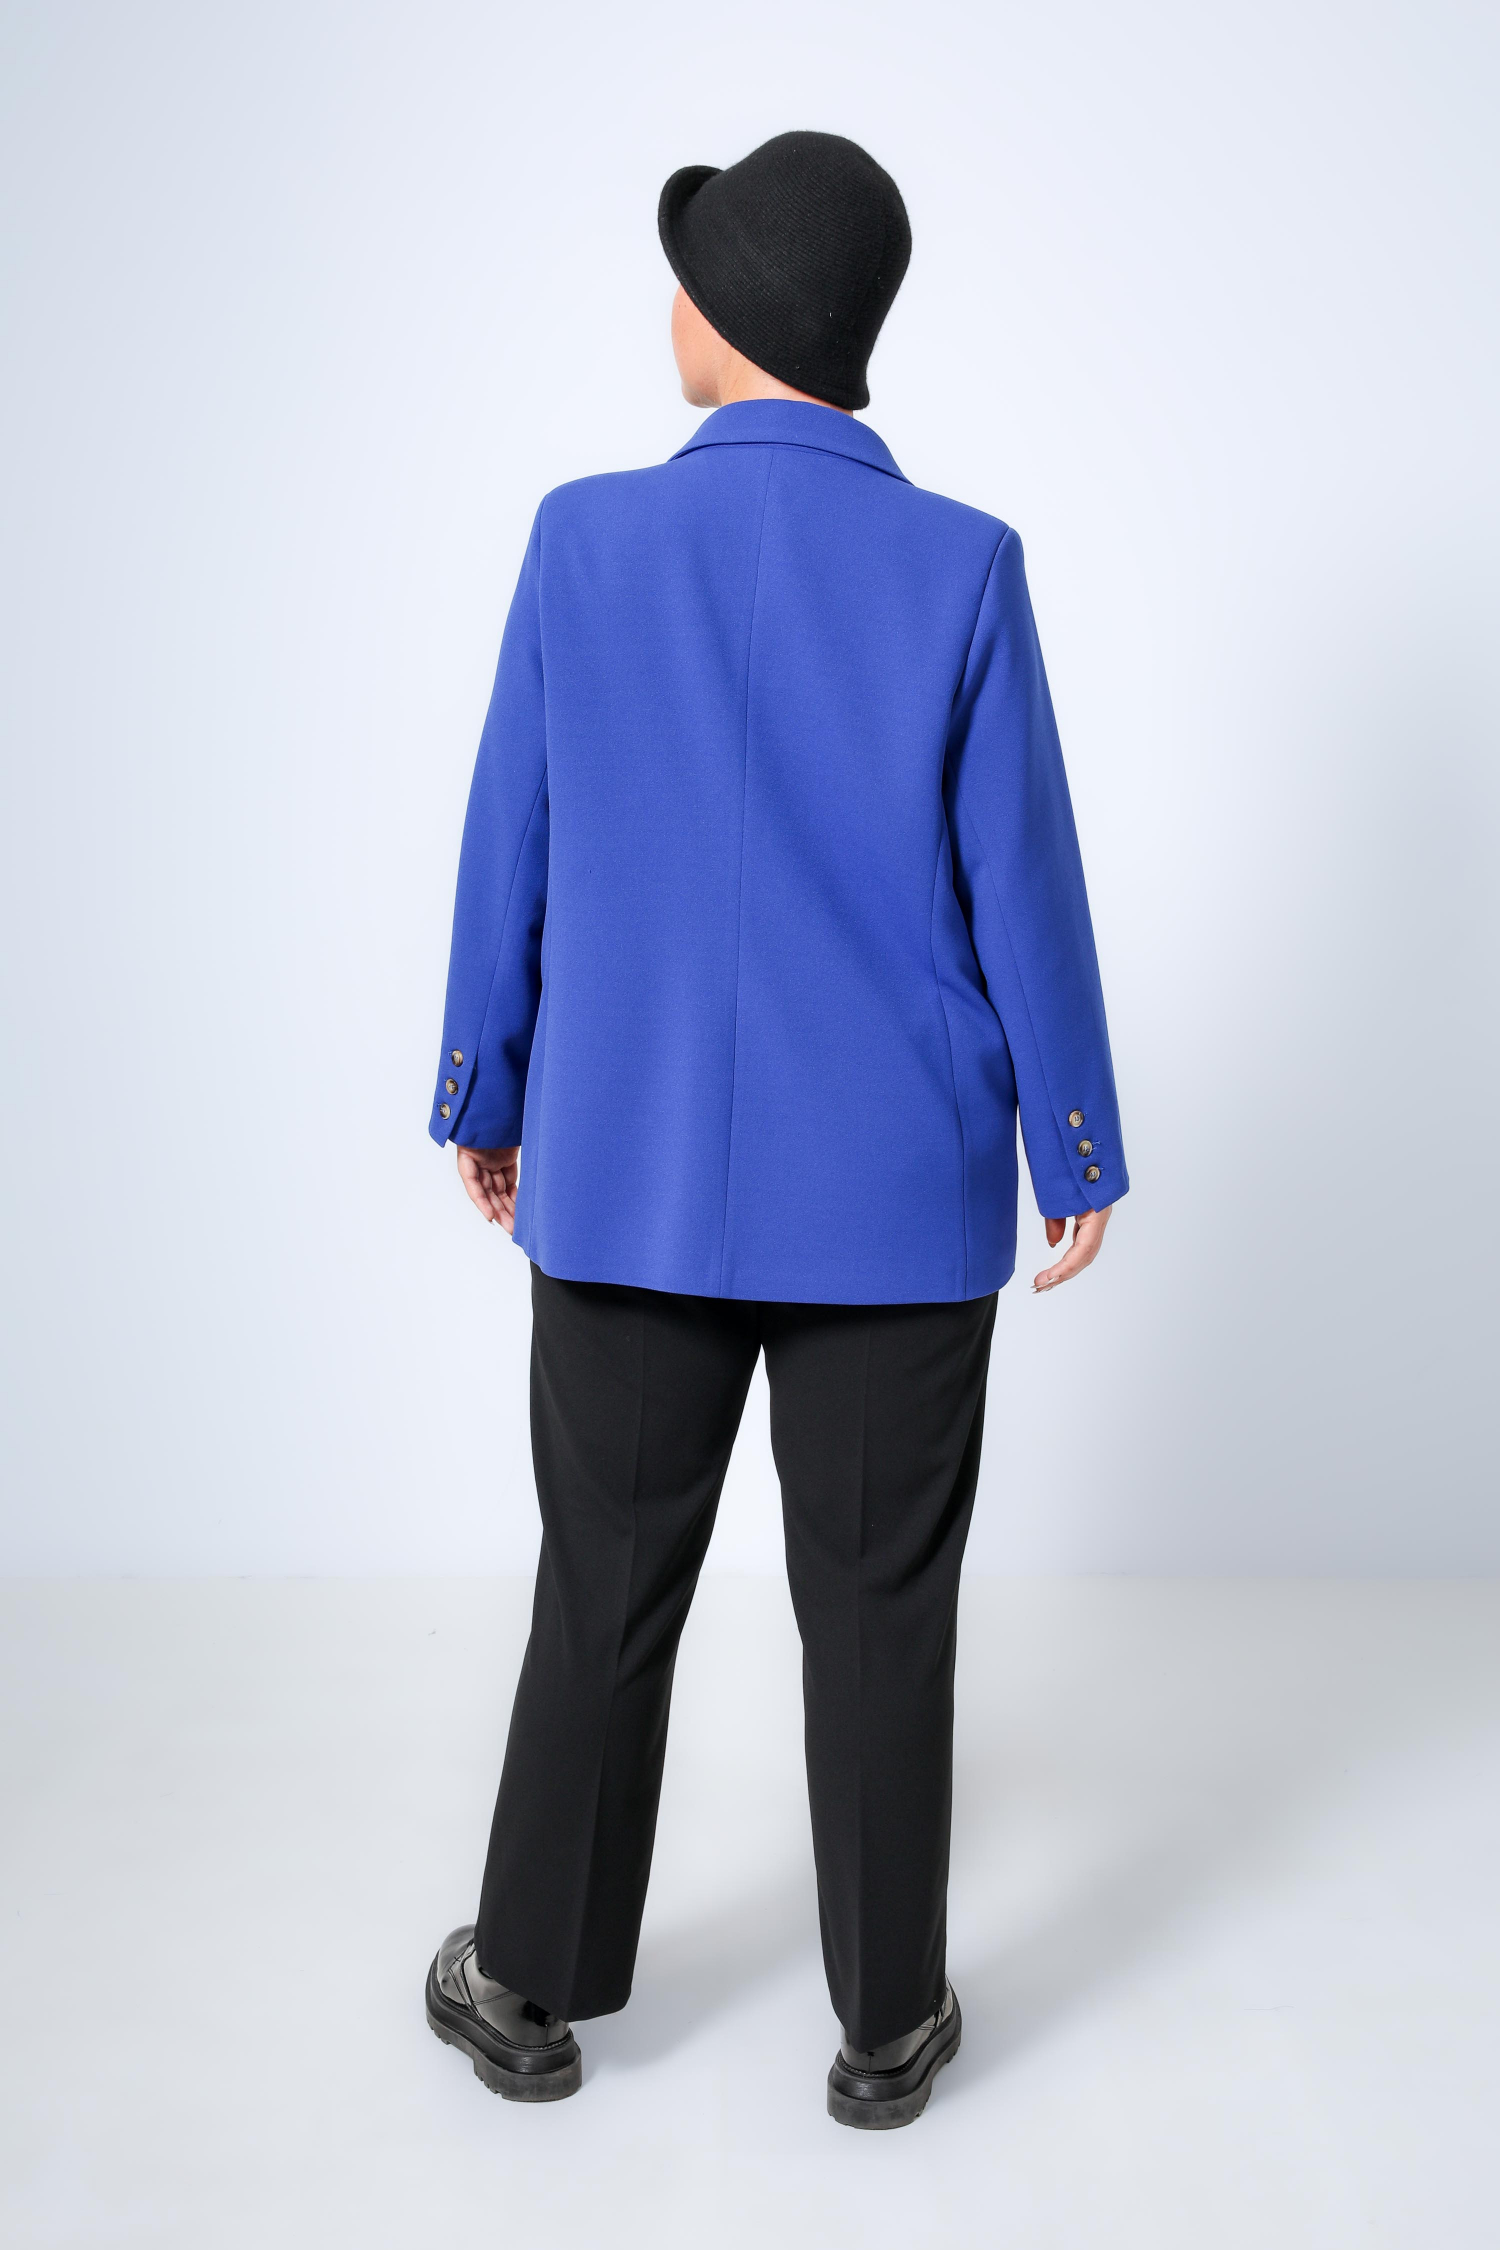 Plain double-breasted suit jacket